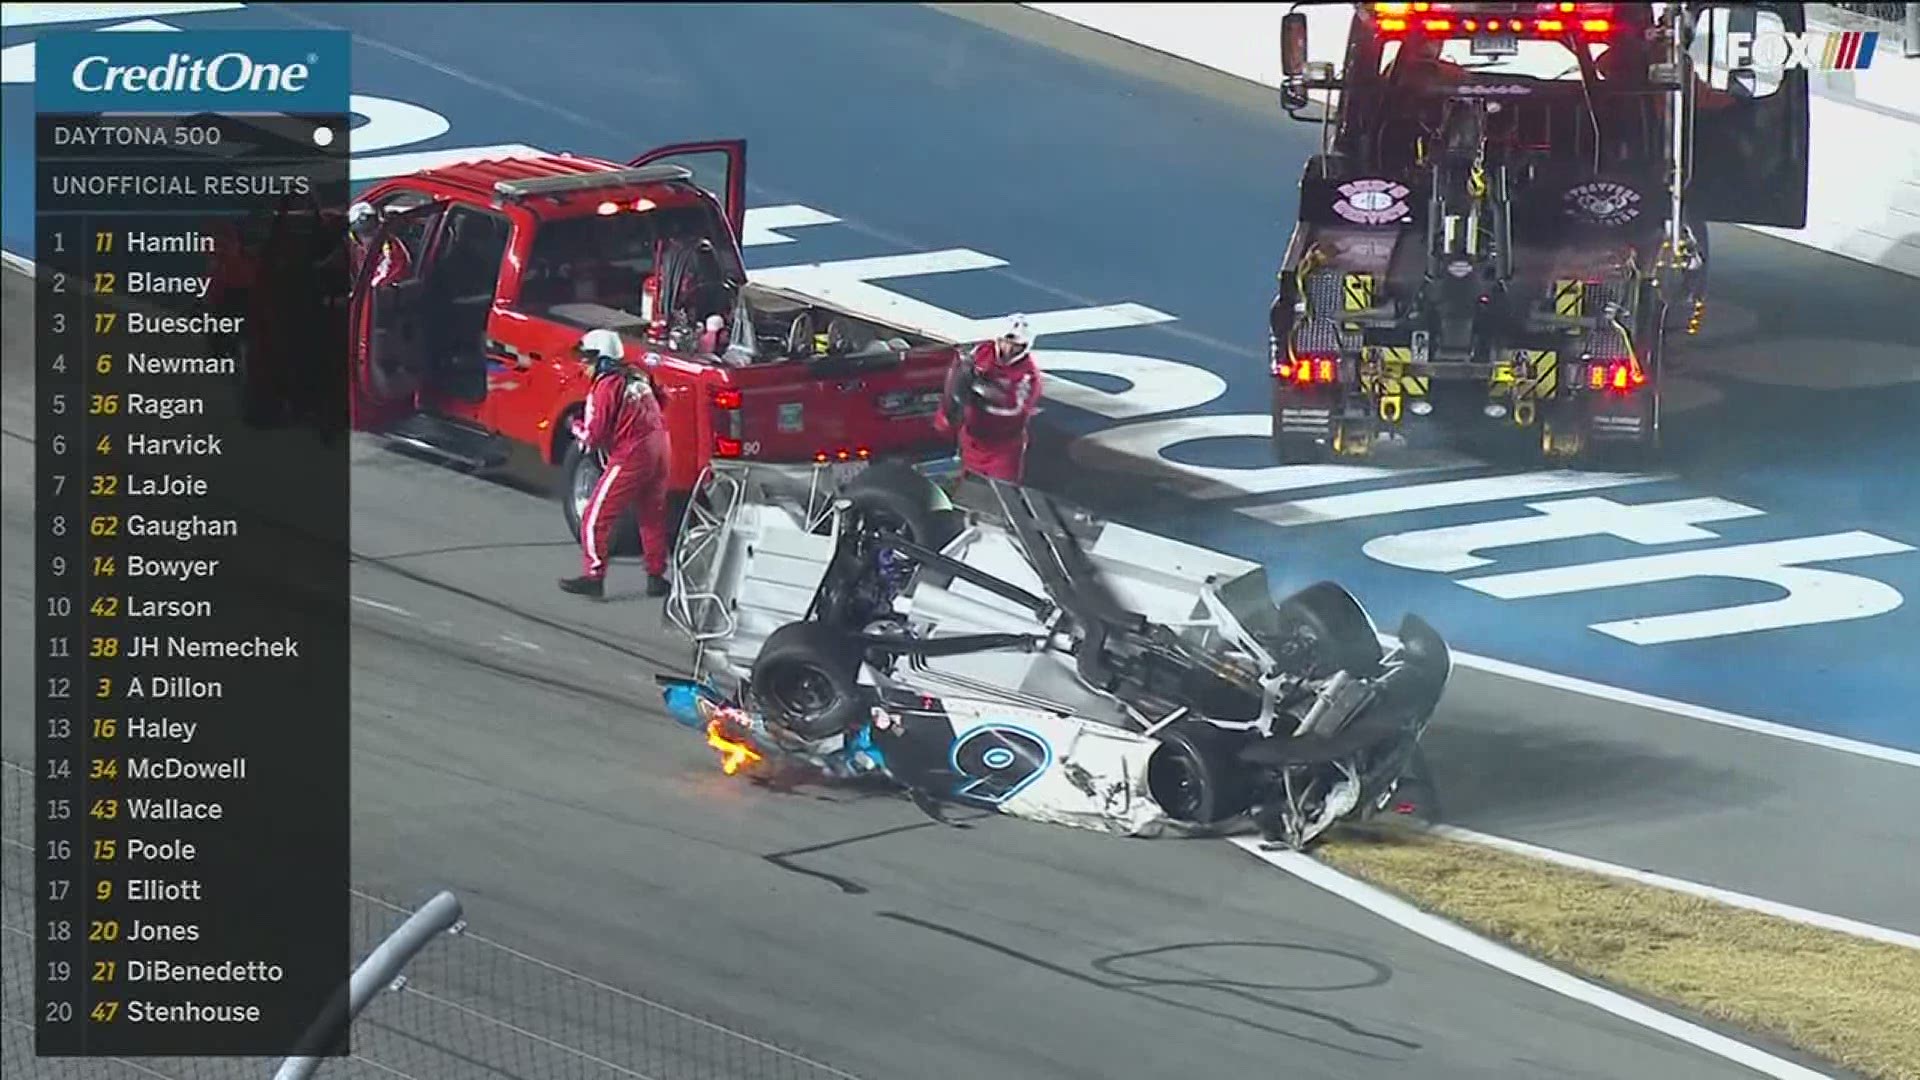 Driver Ryan Newman was hospitalized after the frightening crash on the last lap of the race.